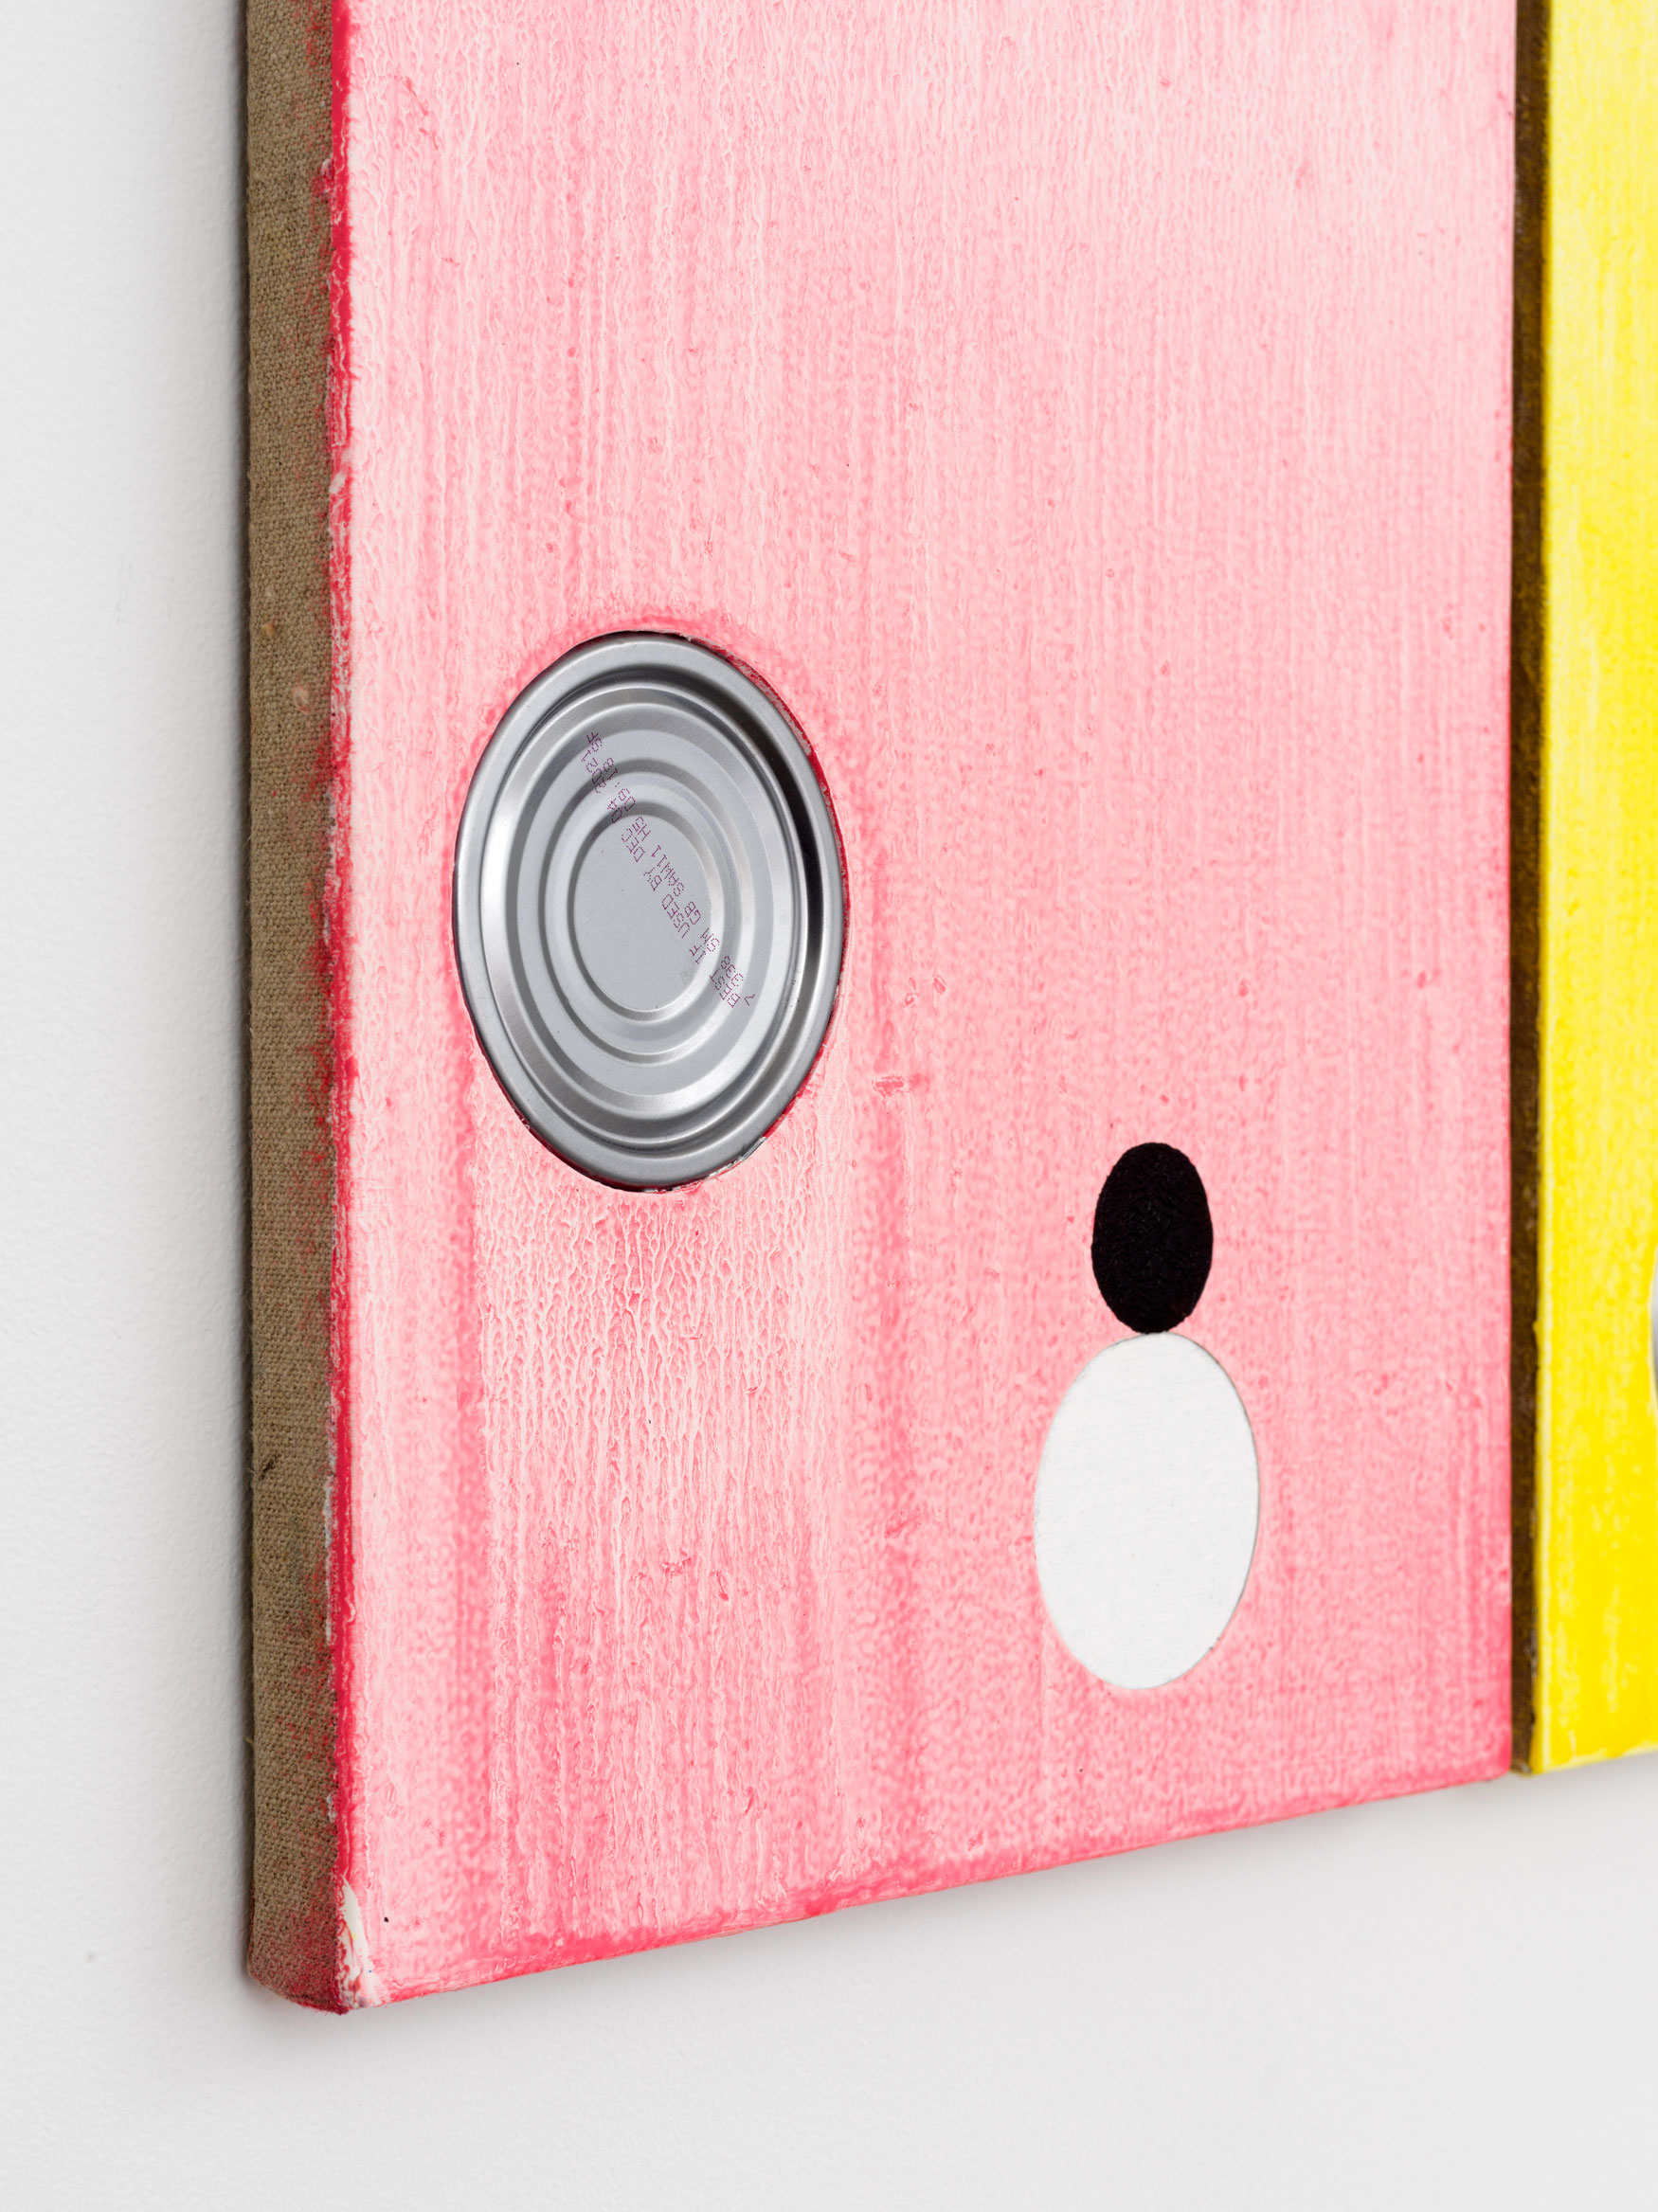 Alex Kwartler, Chord detail, 2019, oil, acrylic, and aluminum can on linen, each panel: 14h x 11w in; overall: 14h x 45.125w in.